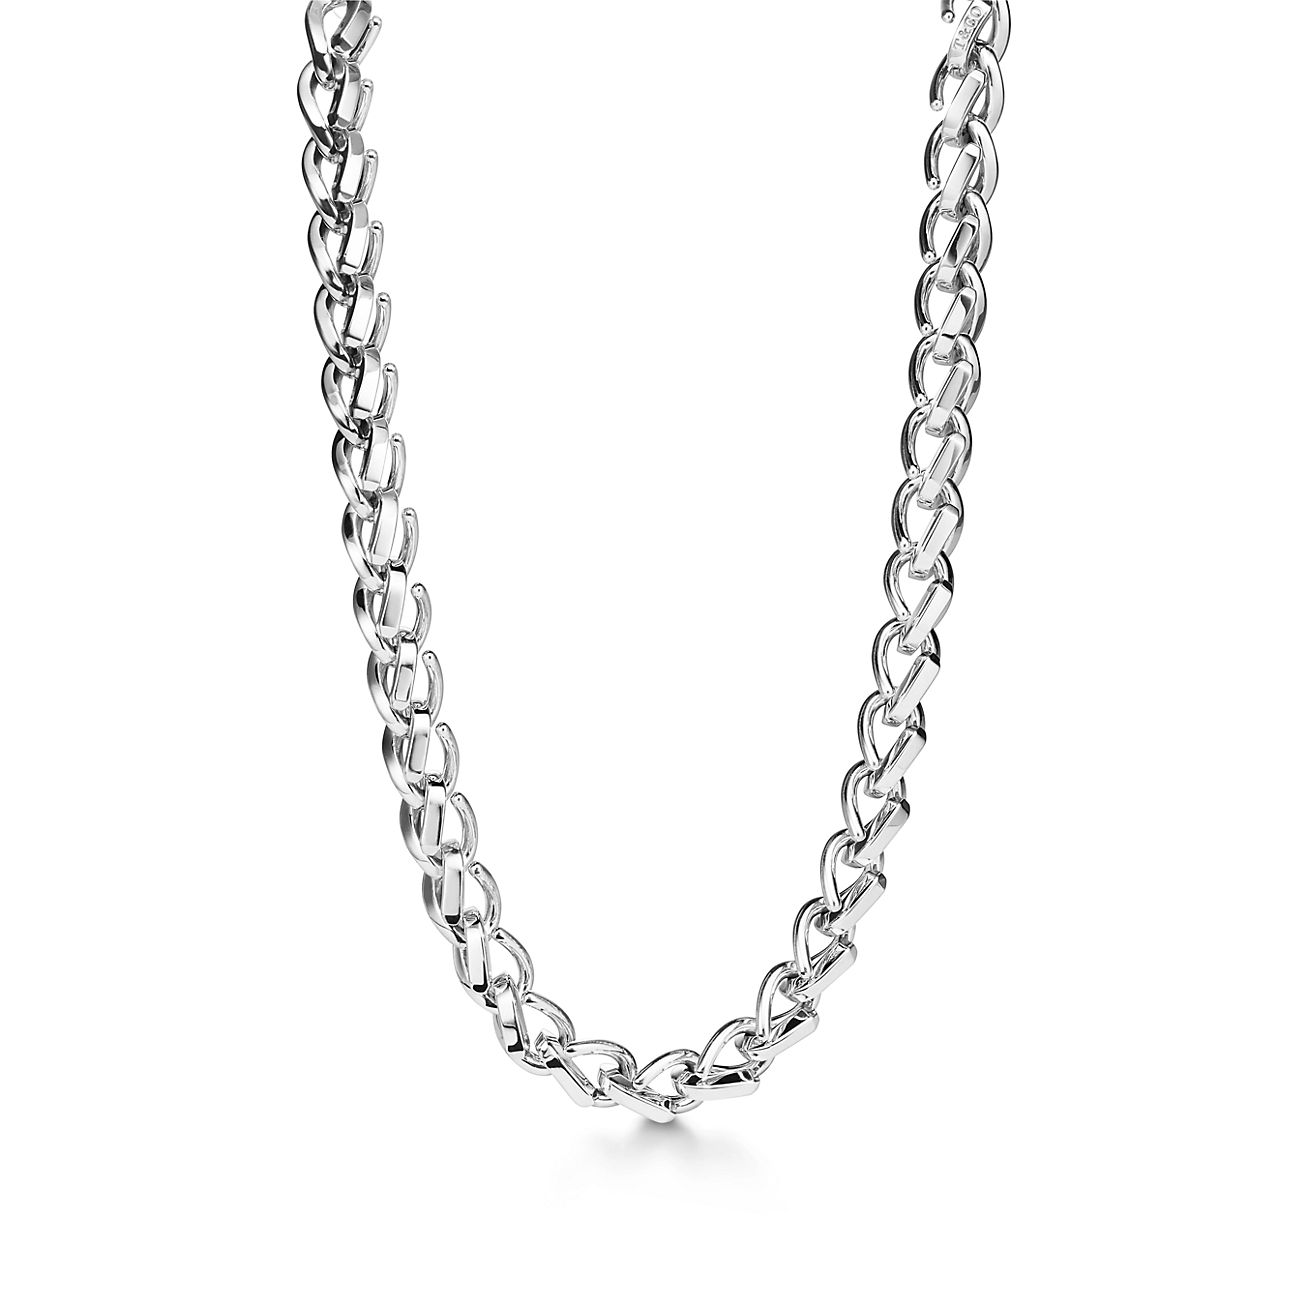 Sterling Silver Large Link Chain Necklace, 20